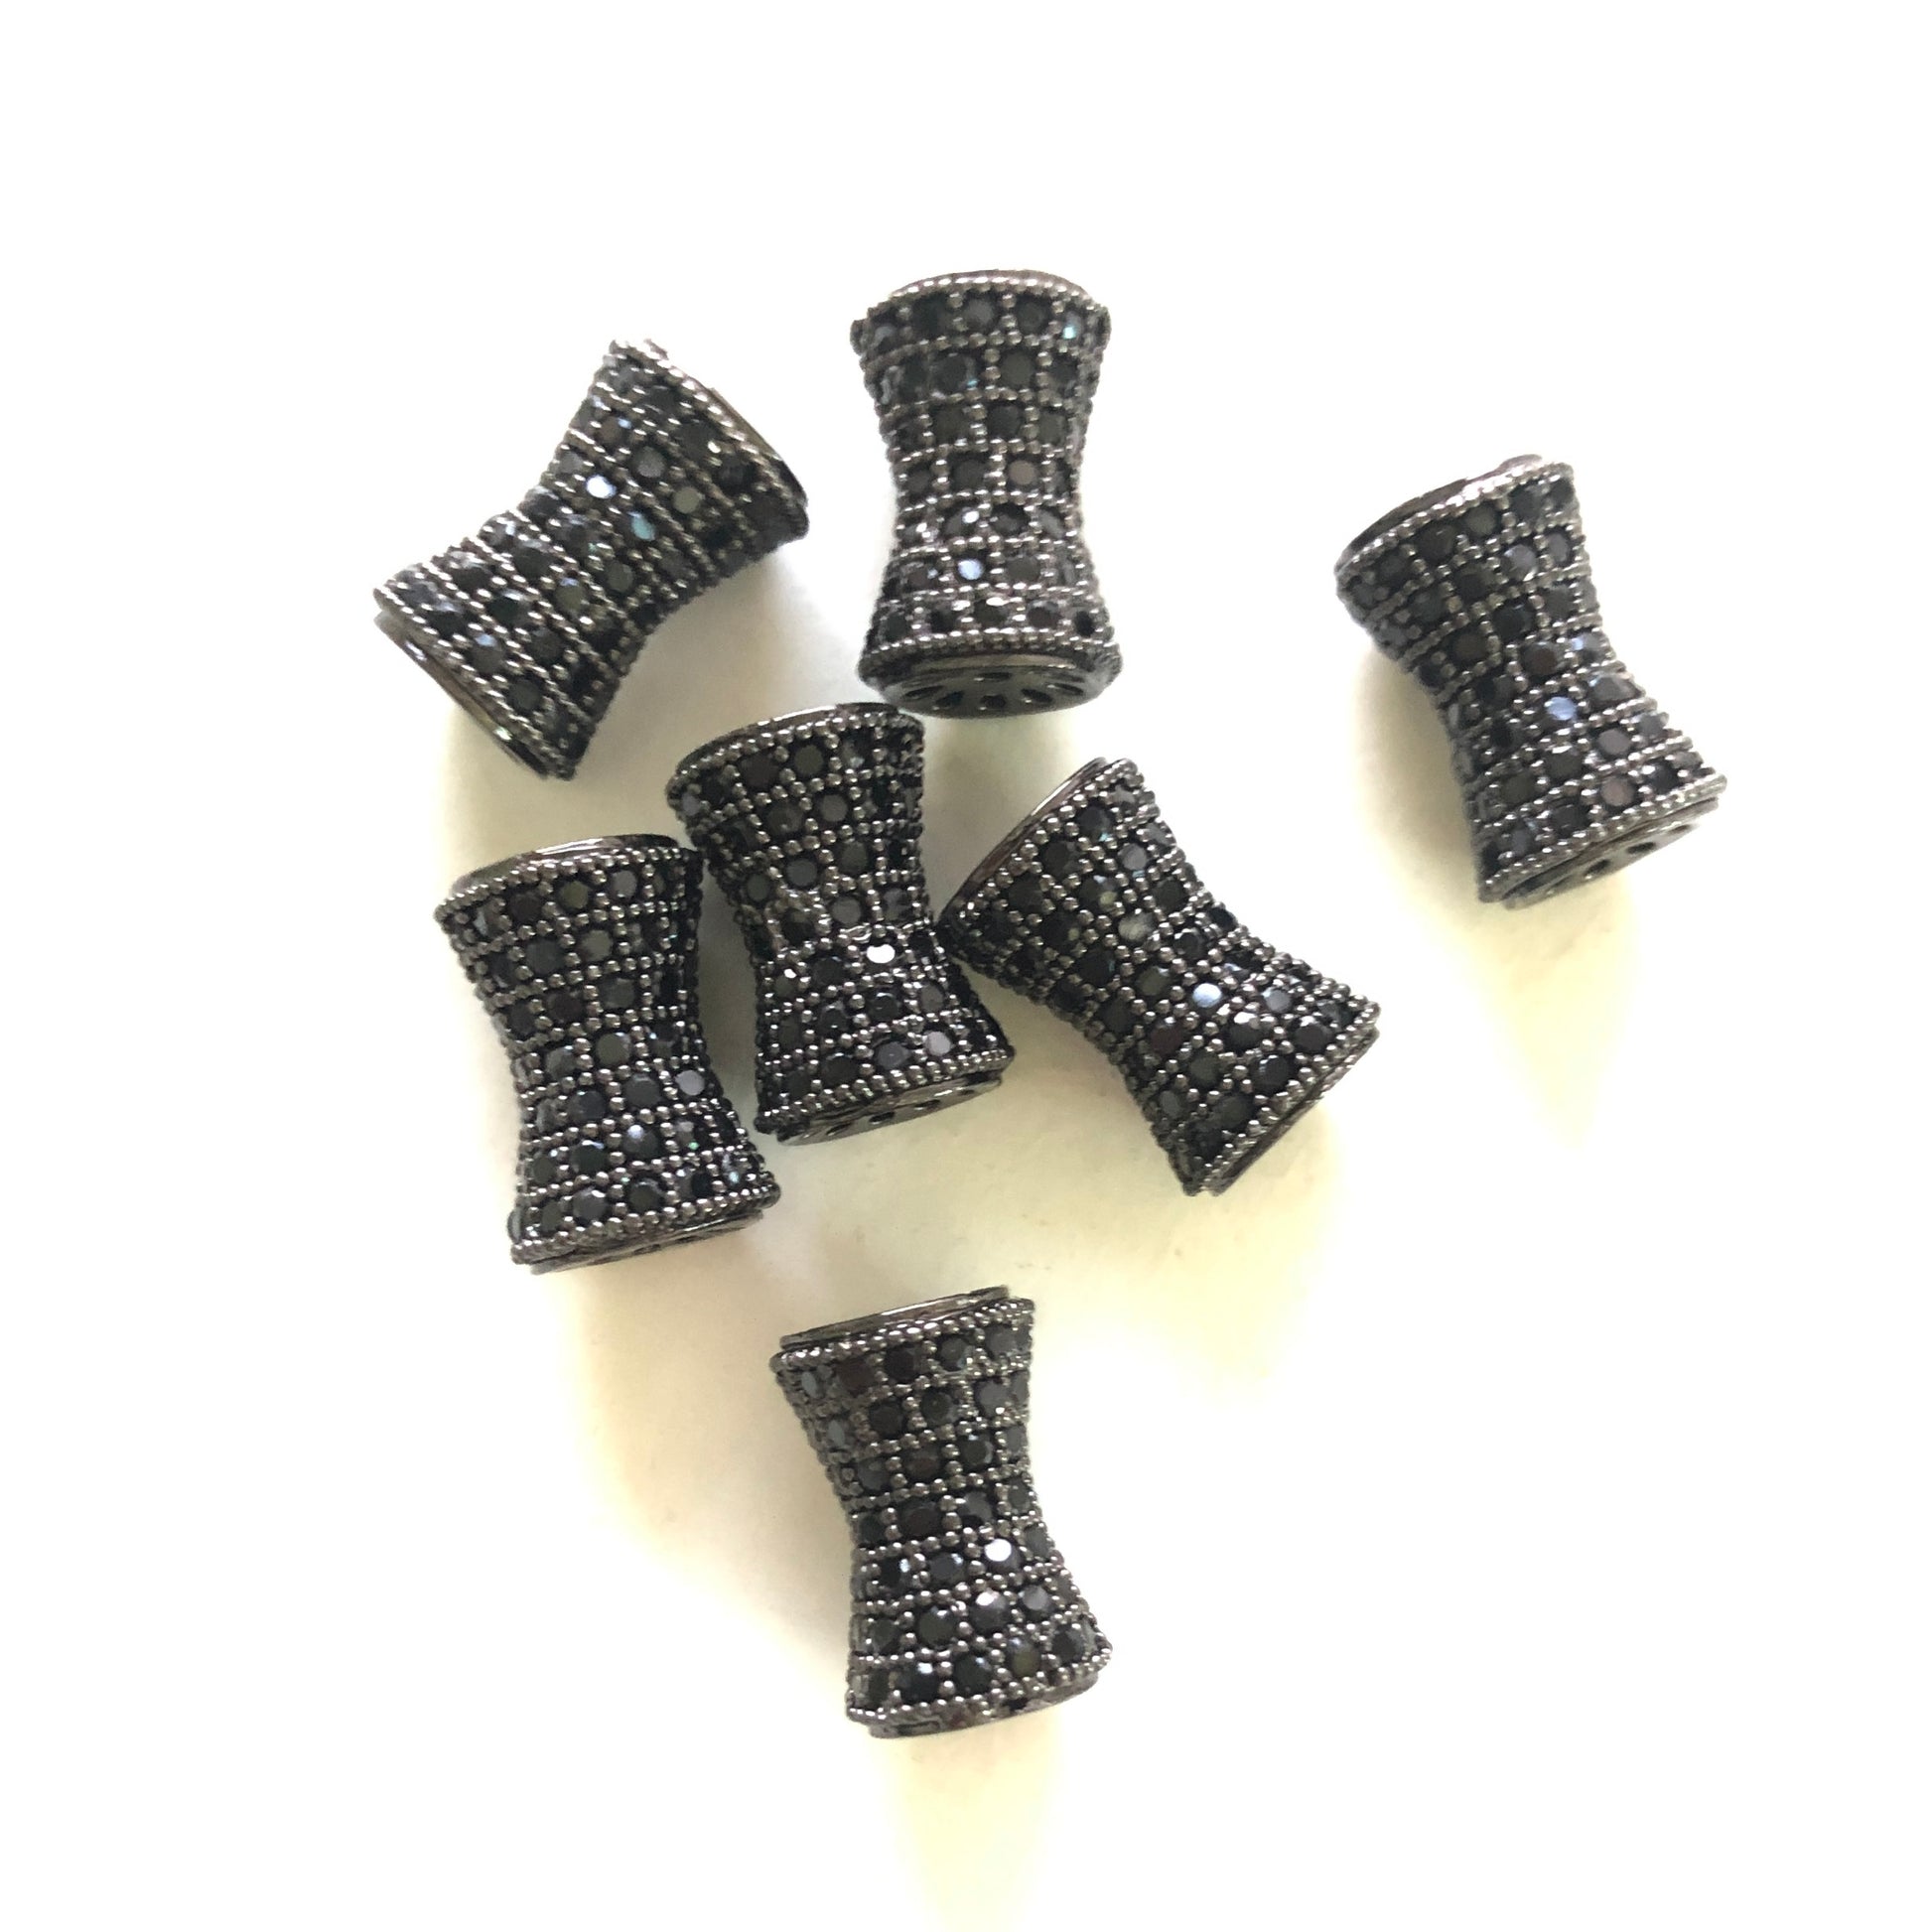 10-20pcs/lot 13.6*9.5mm CZ Paved Hourglass Spacers Black on Black CZ Paved Spacers Hourglass Beads Charms Beads Beyond